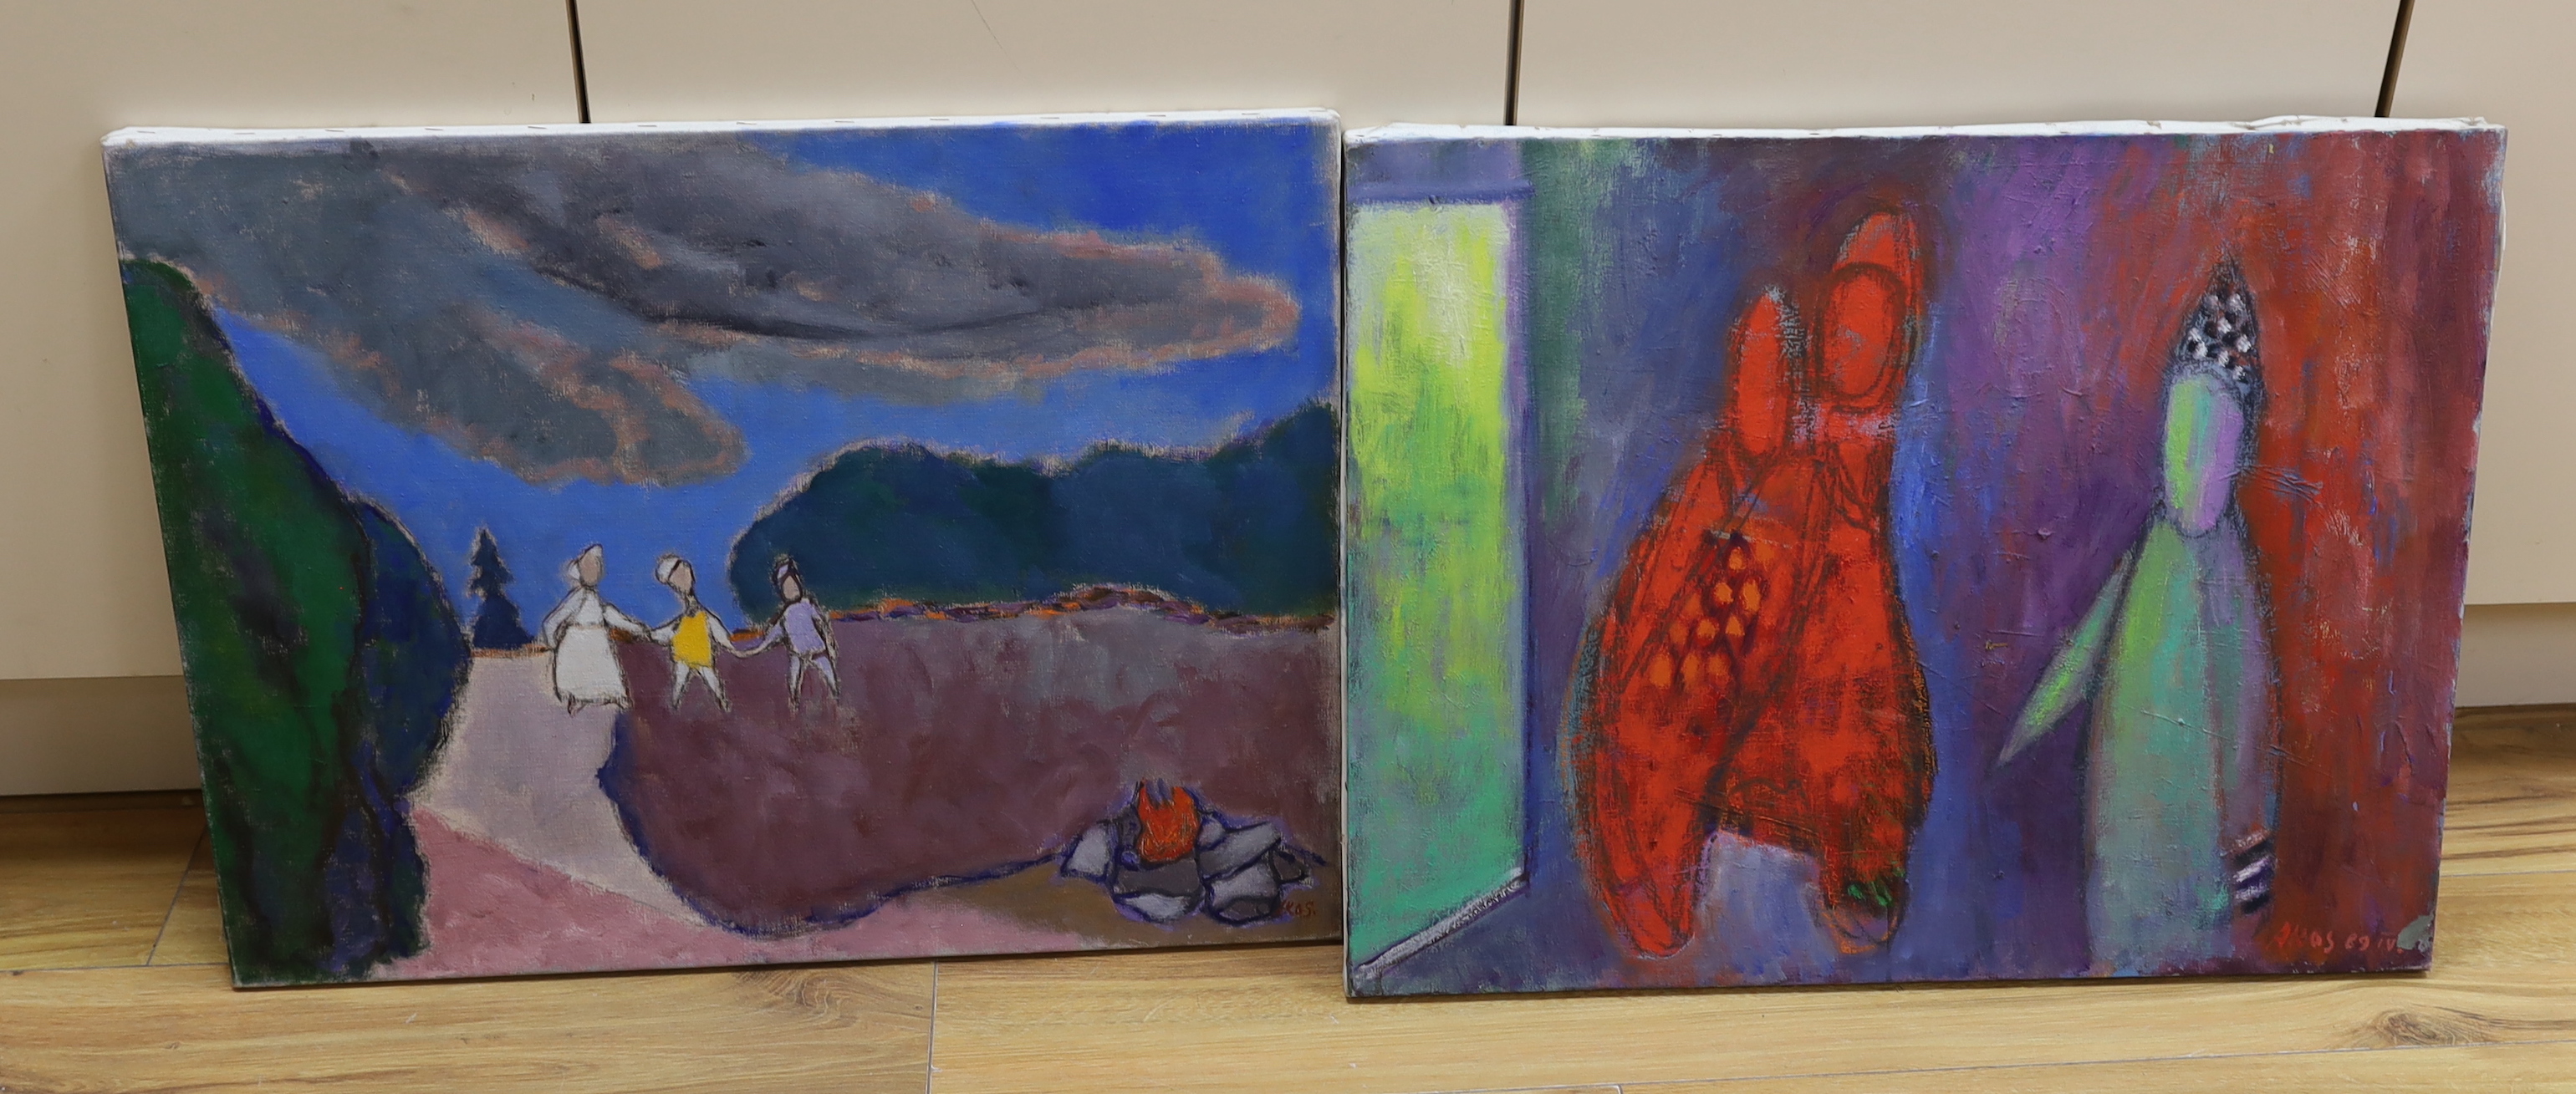 Akos Biro, (Hungarian, 1911-2002), pair of oils on canvas, Abstract figural scenes, each signed, 49 x 65cm